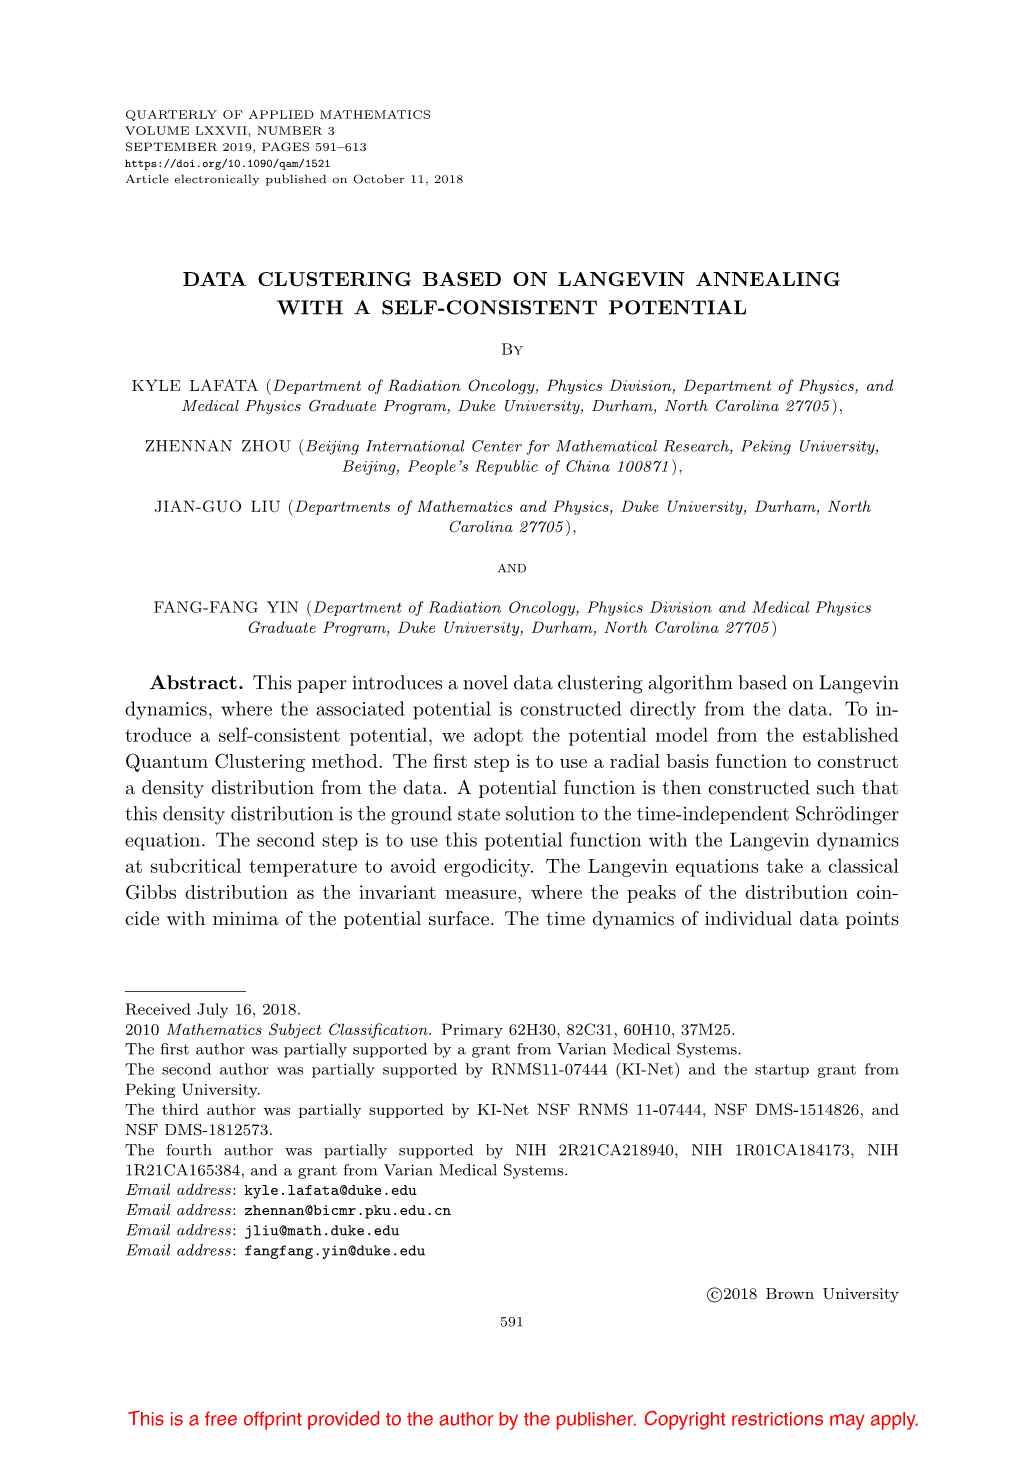 Data Clustering Based on Langevin Annealing with a Self-Consistent Potential